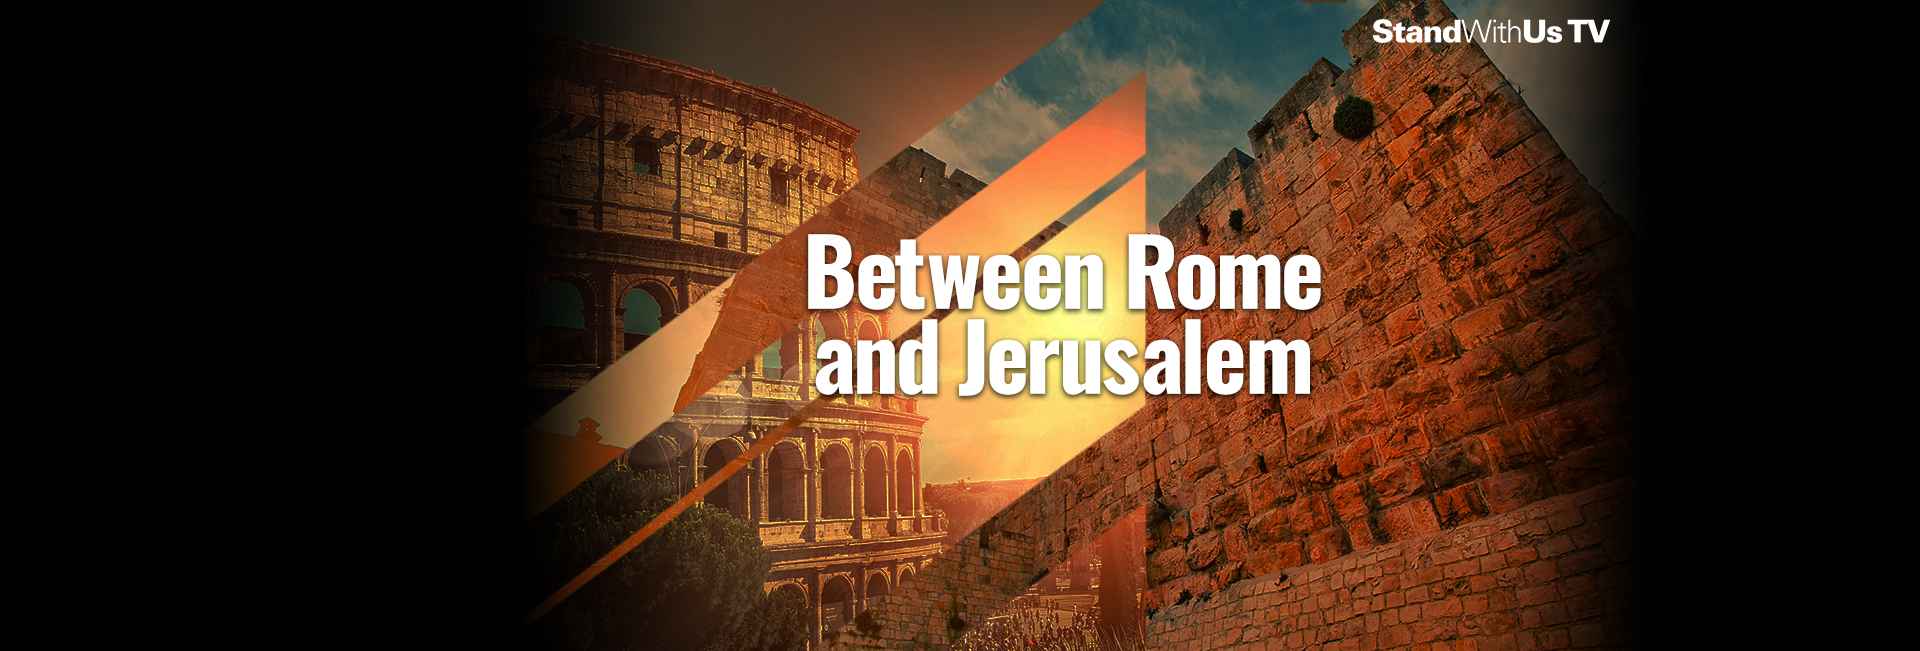 Between Rome and Jerusalem Episode 4: Synagogue, Tradition, and the Judeo-Christian Relationship